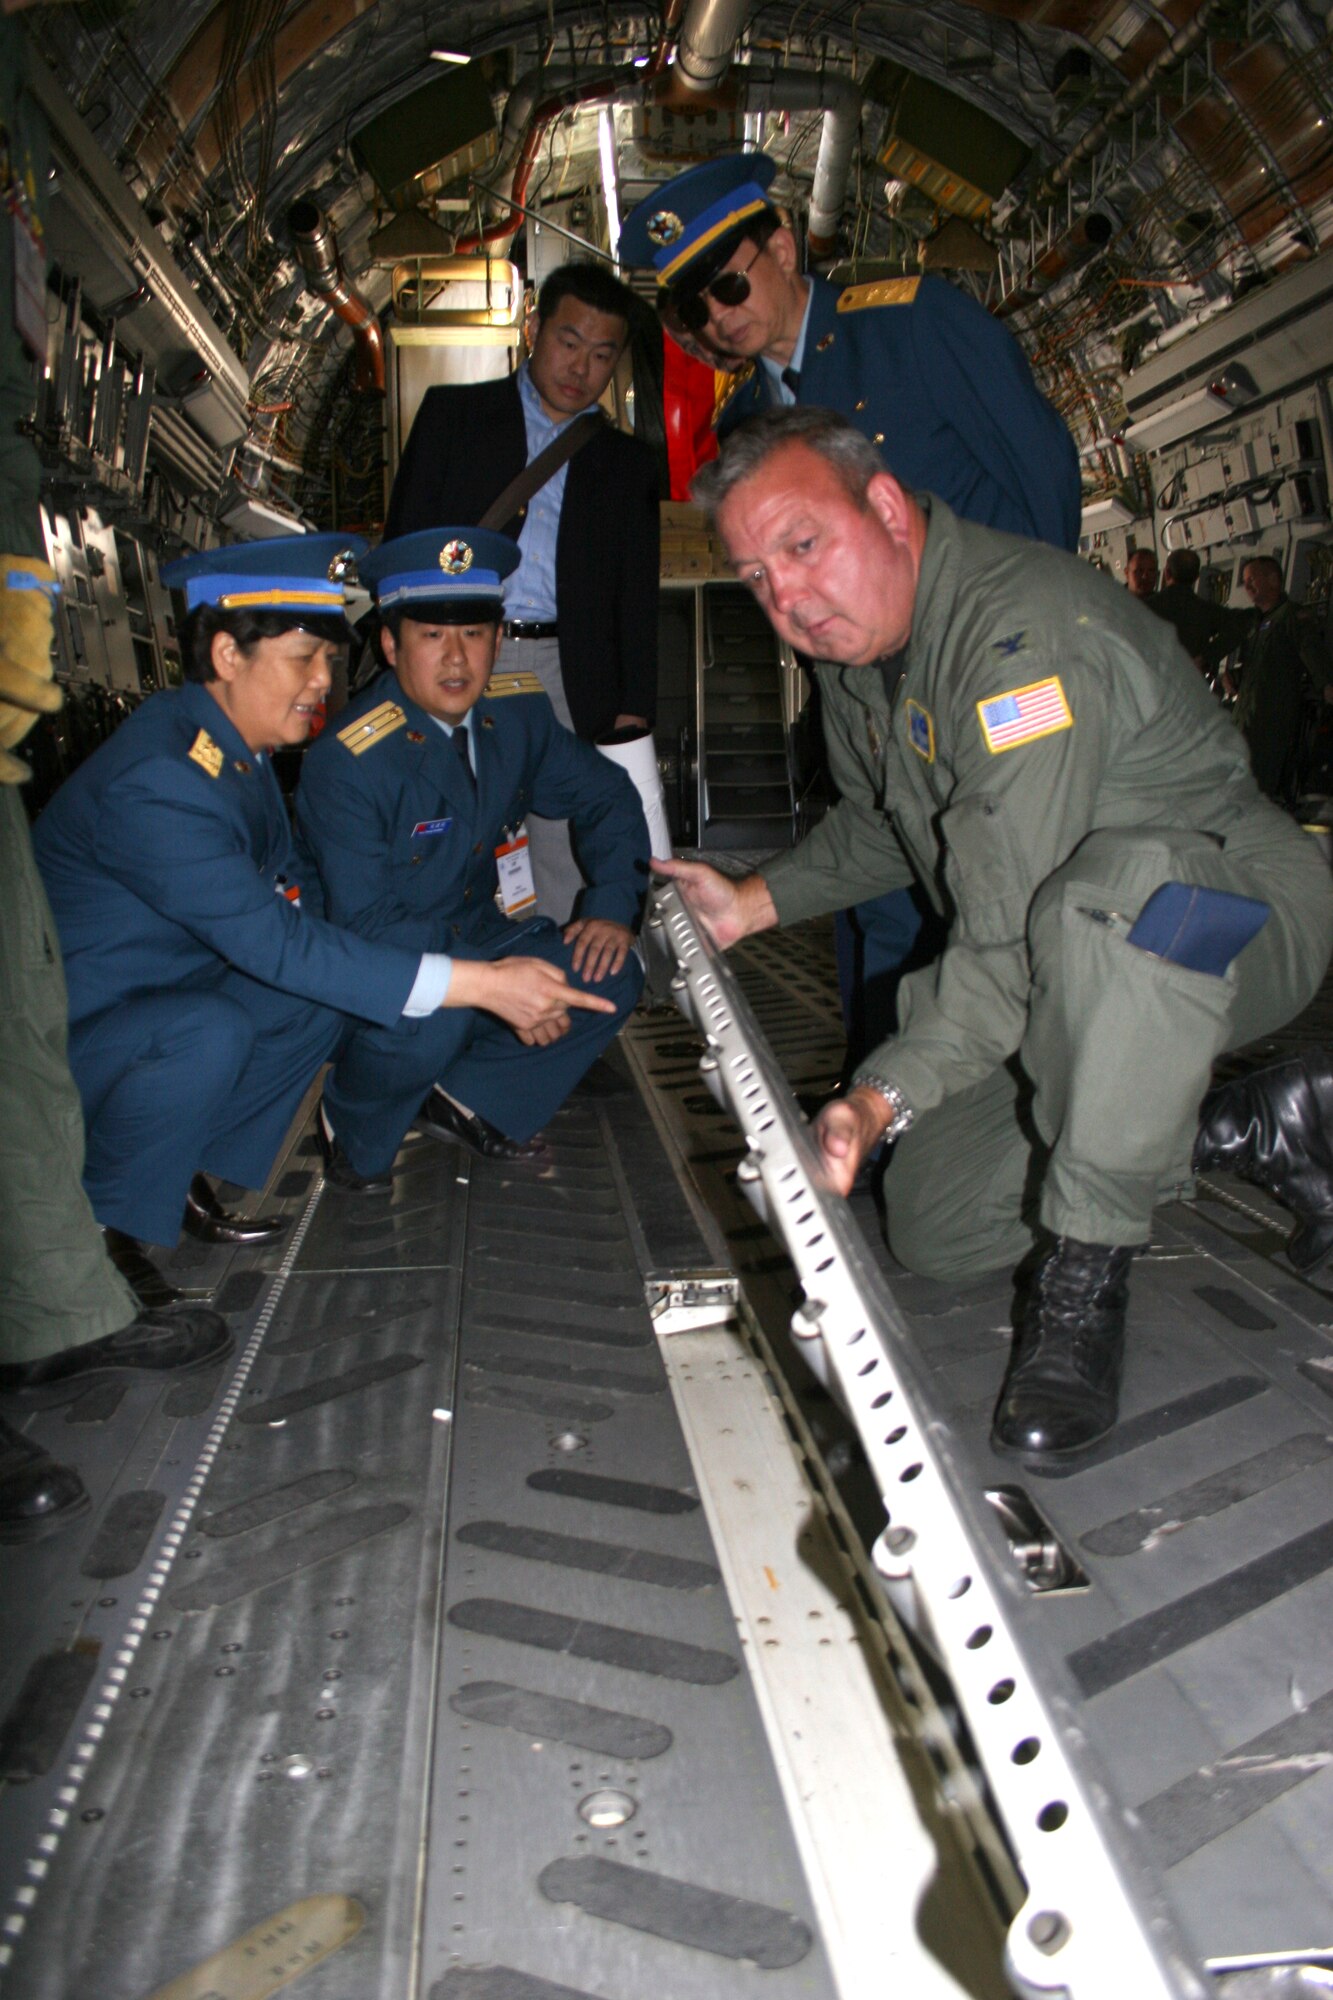 BERLIN, Germany - Col. Gary Cook, 315th Airlift Wing commander at Charleston Air Force Base, S.C., discuss the C-17's cargo load capabilities with Chinese Maj. Gen. Yue Xicui and Chinese Lt. Gen. Huang Xin at the Berlin Air Show May 16. Xicui is the Chinese Air Force's first female pilot and has more than 6,000 flying hours. The Chinese delegation also visited the B-1 Lancer and C-130J Hercules aircraft. Various models of U.S. military aircraft and about 60 support personnel from bases in Europe and the United States are attending the air show at Berlin-Schoenefeld Airport May 16-21. The Berlin Air Show is one of the premier events of its type in the world, and U.S. military participation contributes to a number of U.S. security and foreign policy interests. Participation promotes standardization and interoperability of equipment with our NATO allies and other potential coalition partners, highlights the strength of the U.S. commitment to the security of Europe and demonstrates that U.S. industry is producing equipment that will be critical to the success of current and future military operations.  (Photo by Maj. Pamela A.Q. Cook, USAF)
